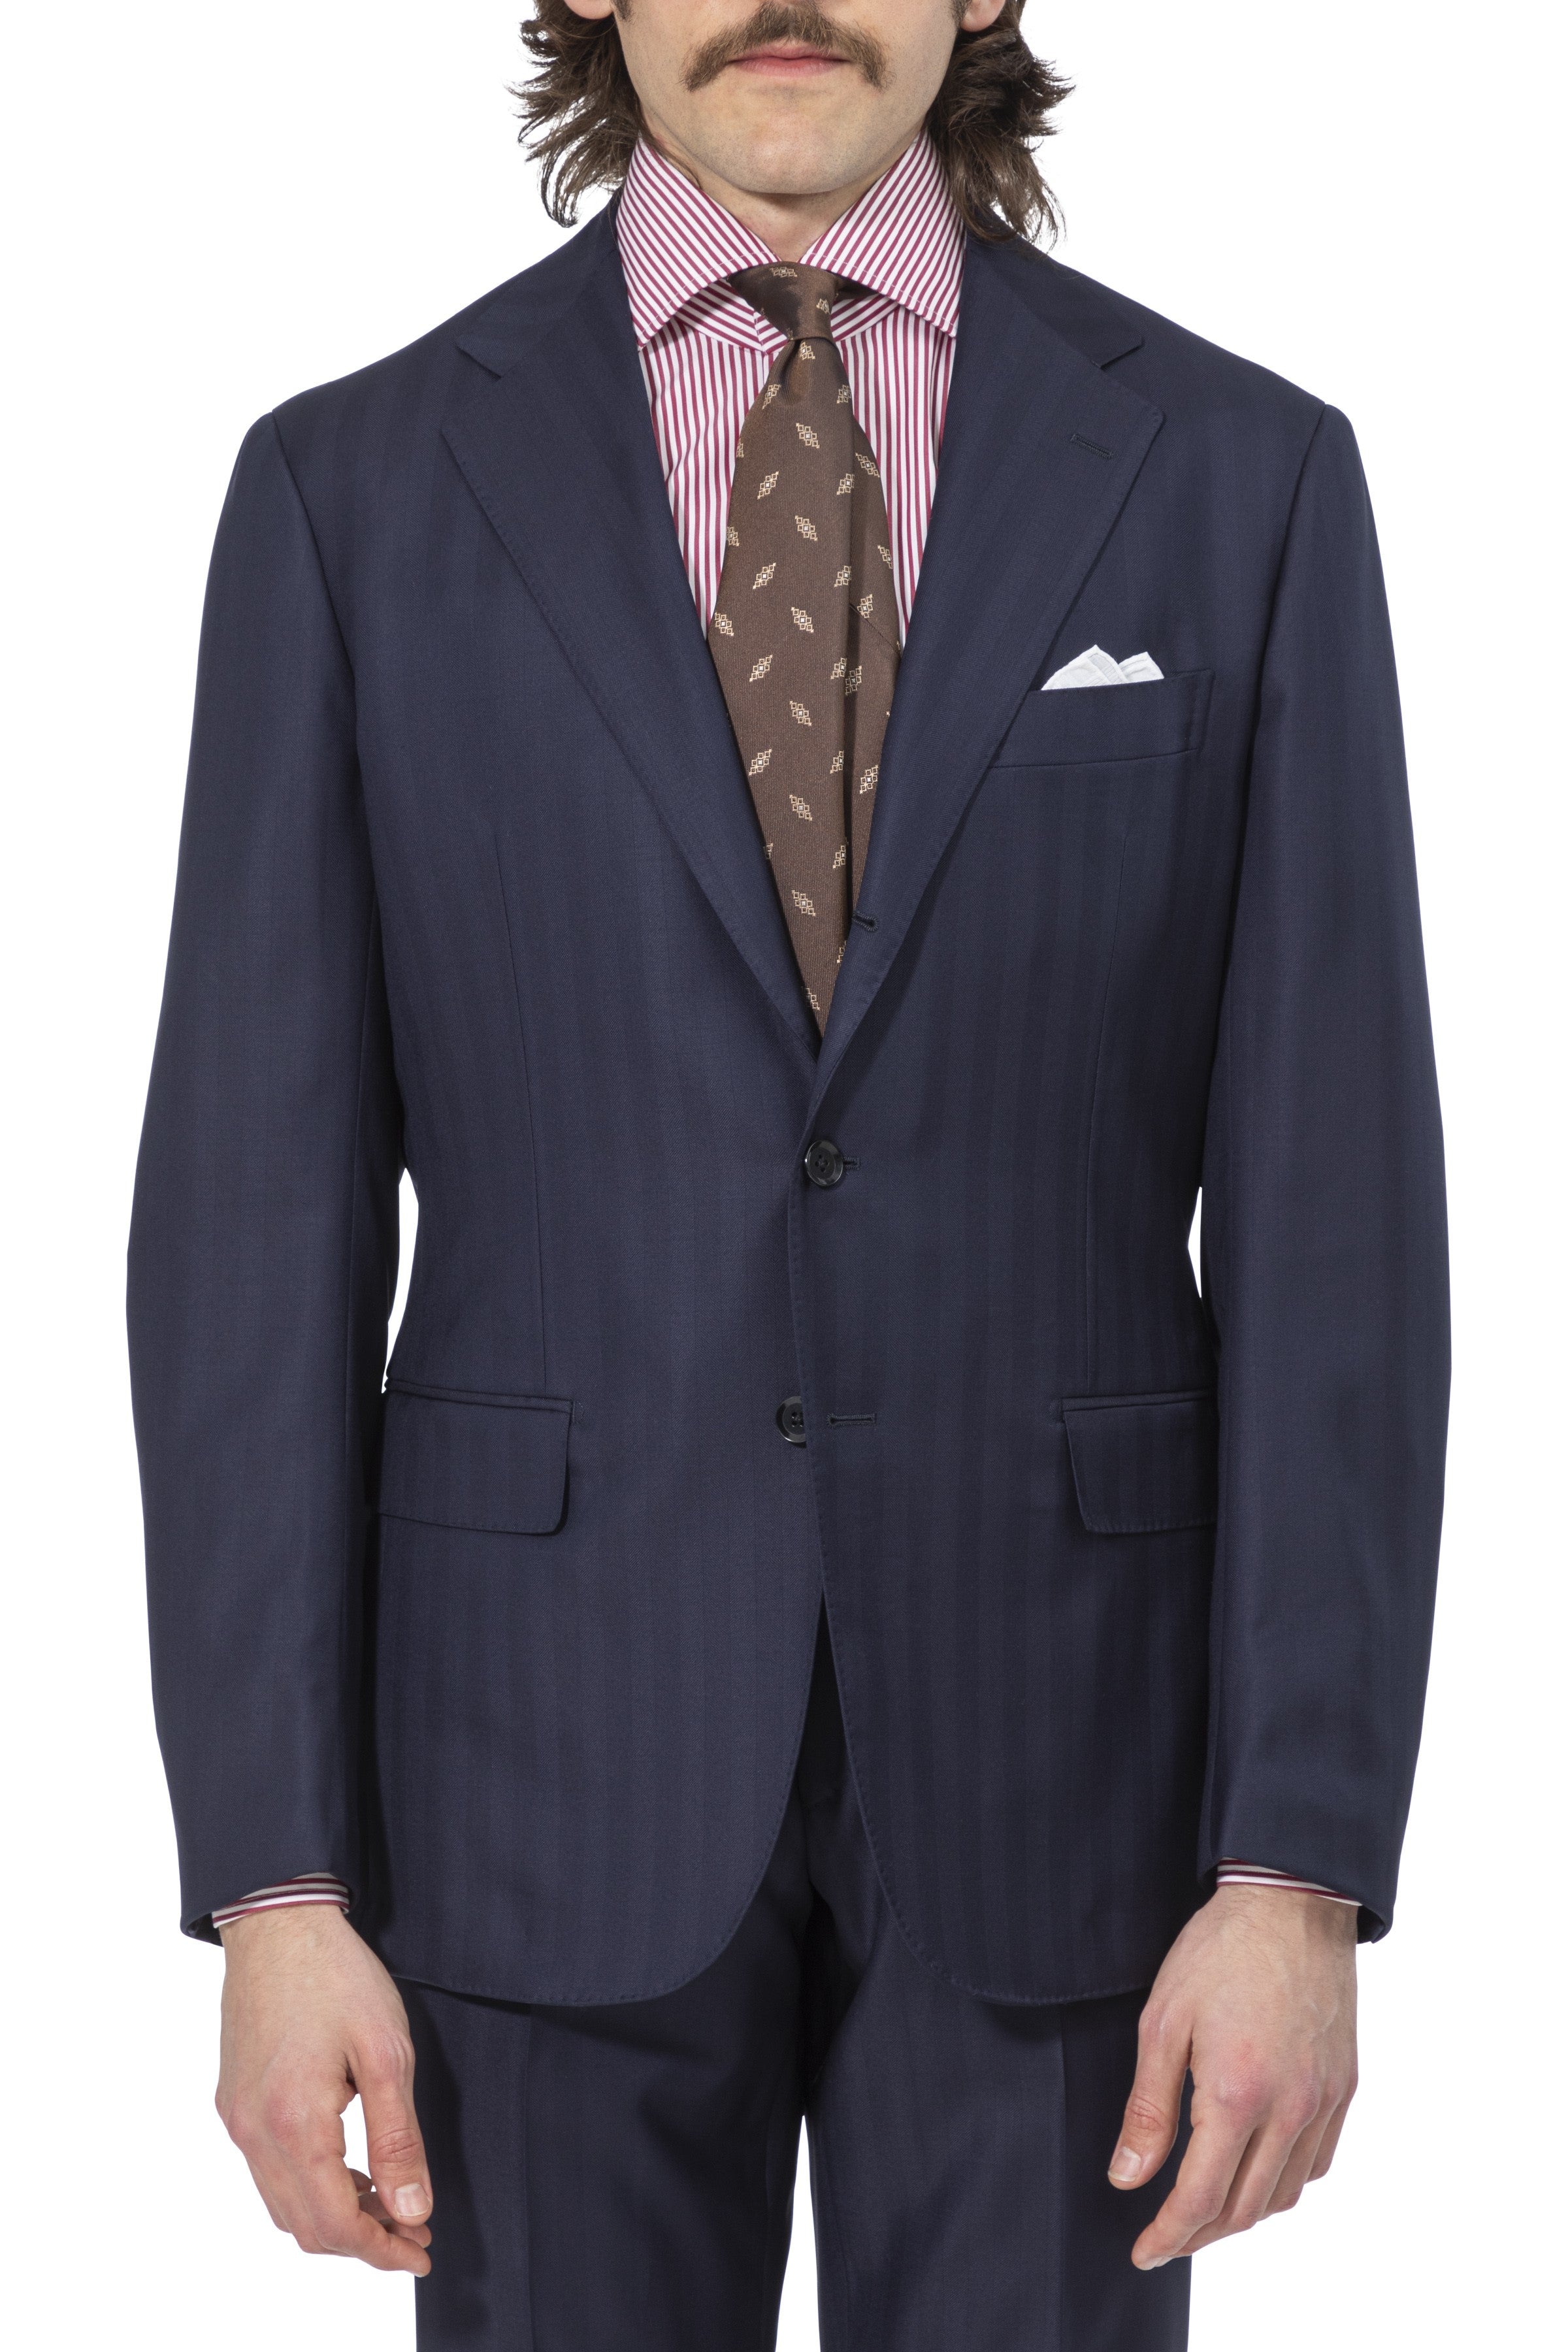 The Armoury by Ring Jacket Navy Wool Herringbone Model 3A Suit